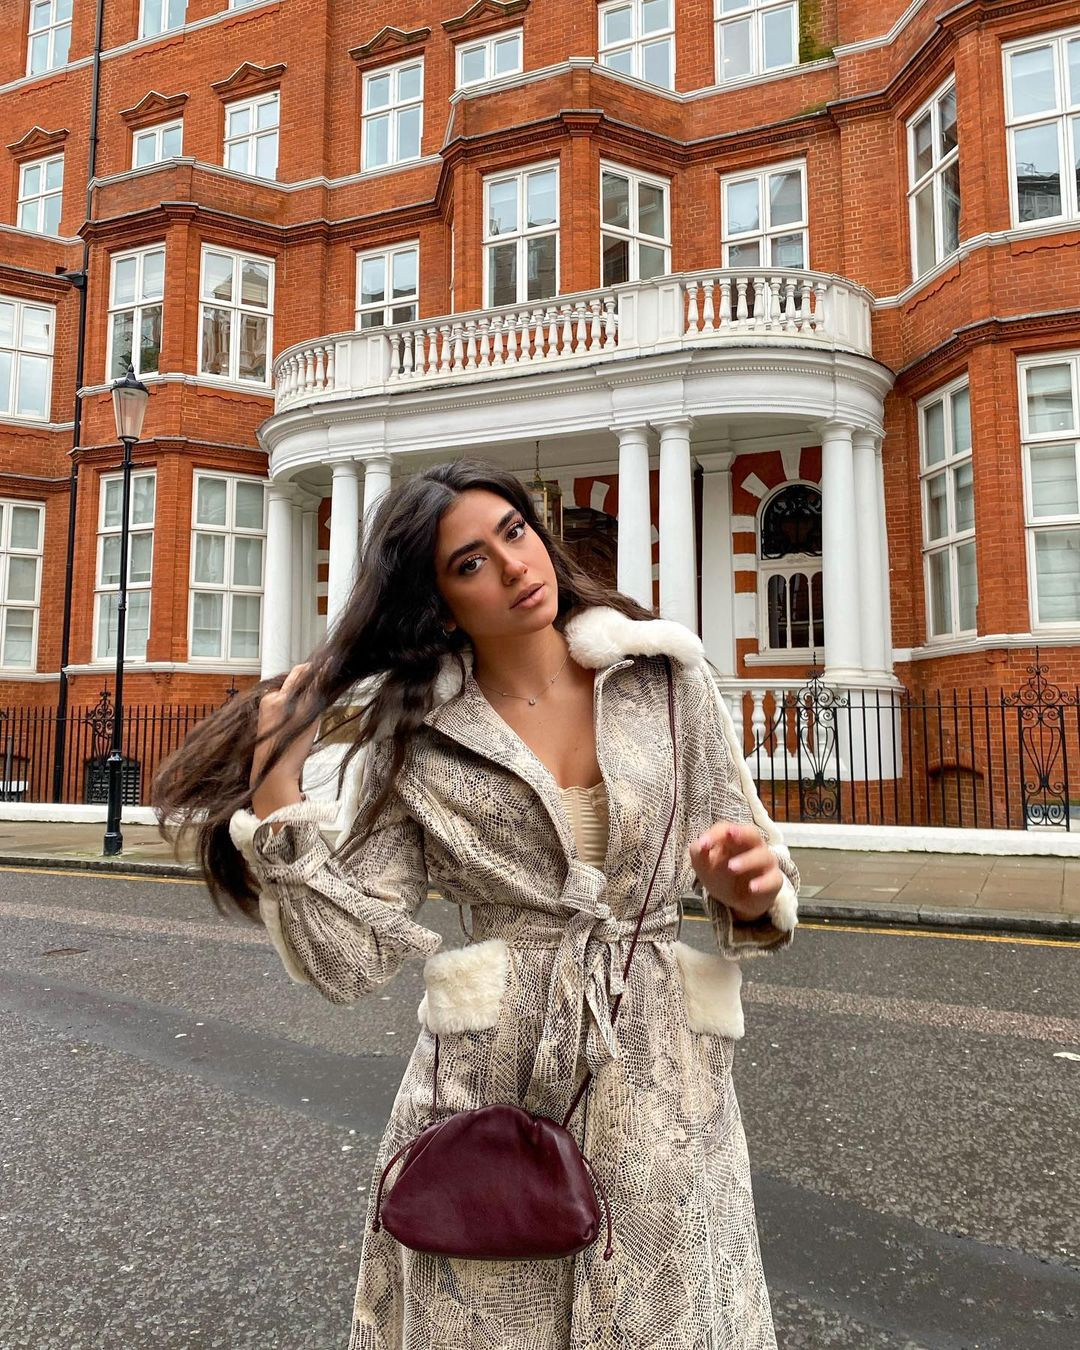 Natasha Aris out & about in London | About Her